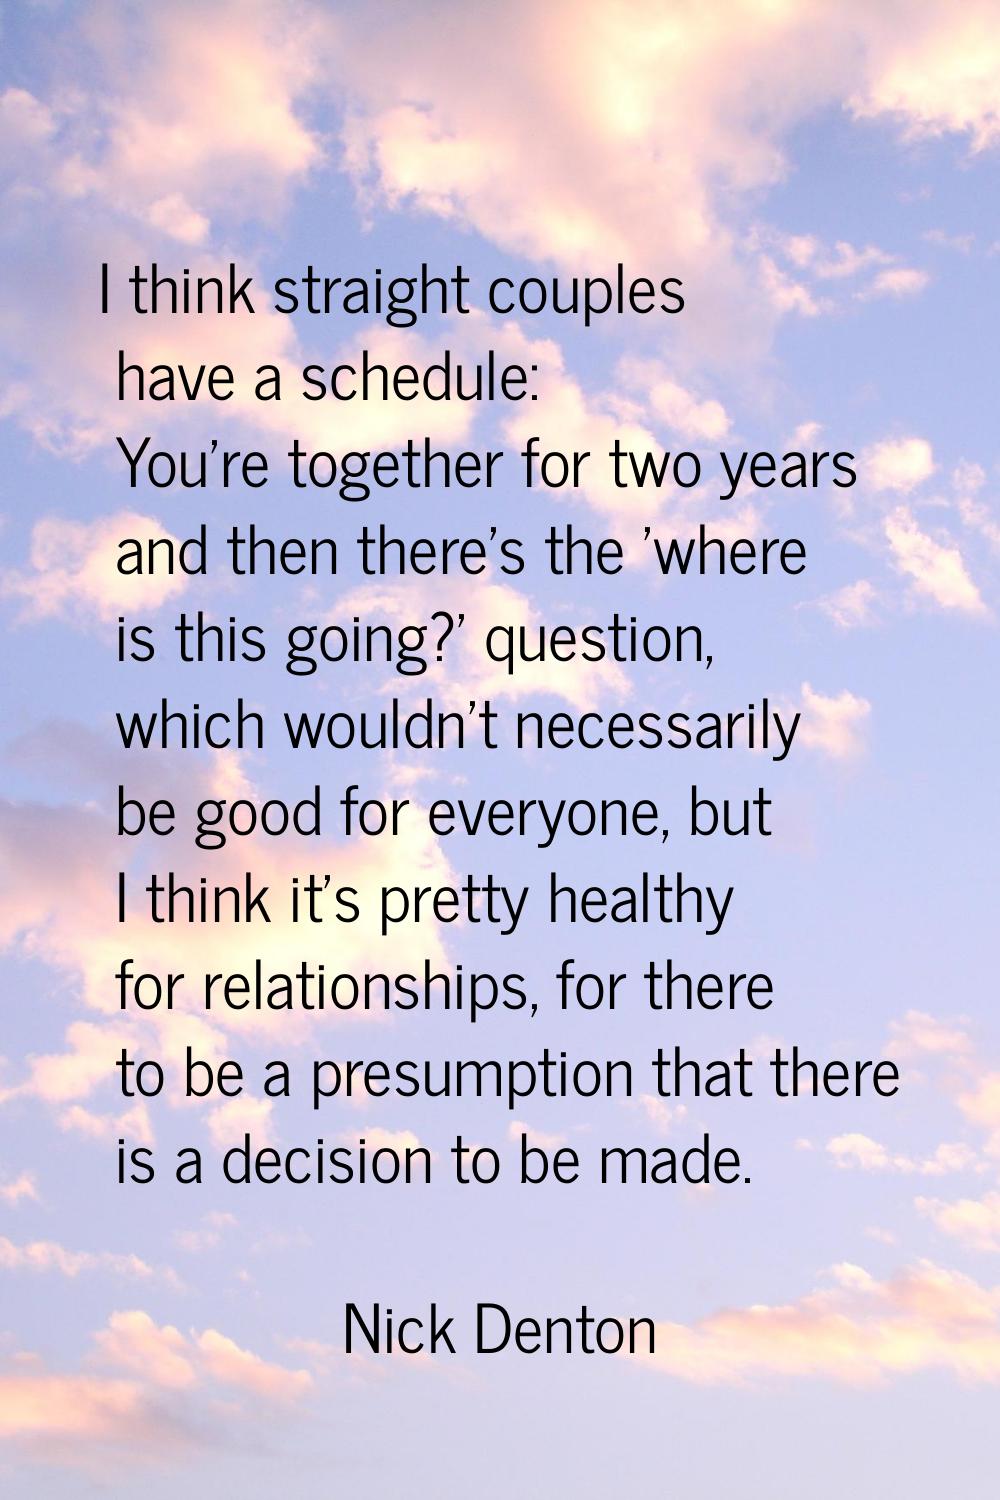 I think straight couples have a schedule: You're together for two years and then there's the 'where